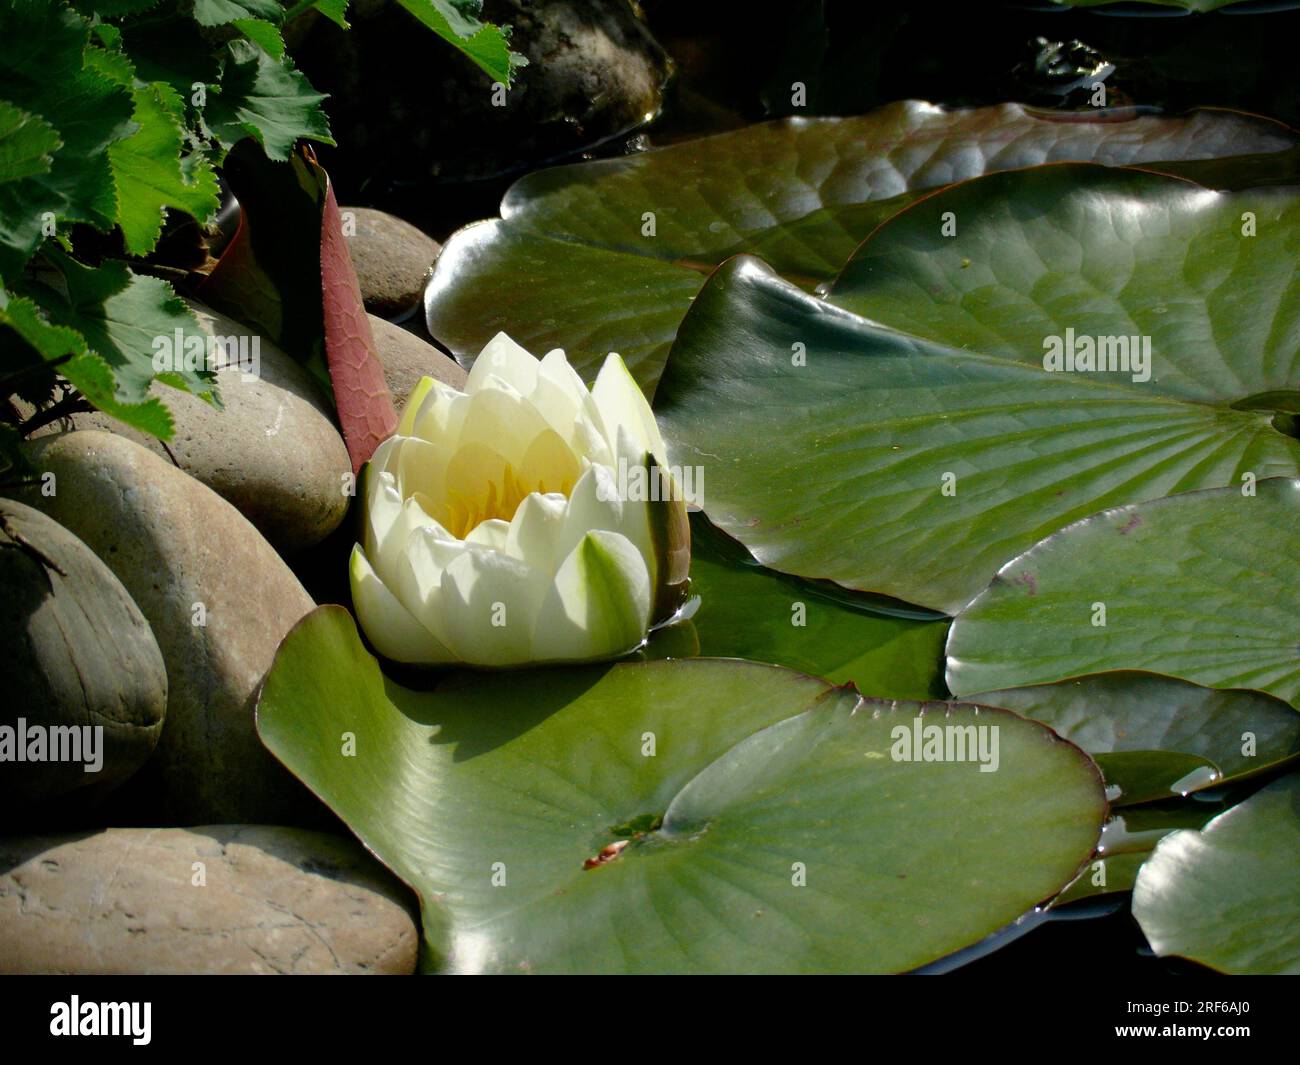 European white water lily (Nymphaea alba) in the garden pond, White water lily Stock Photo